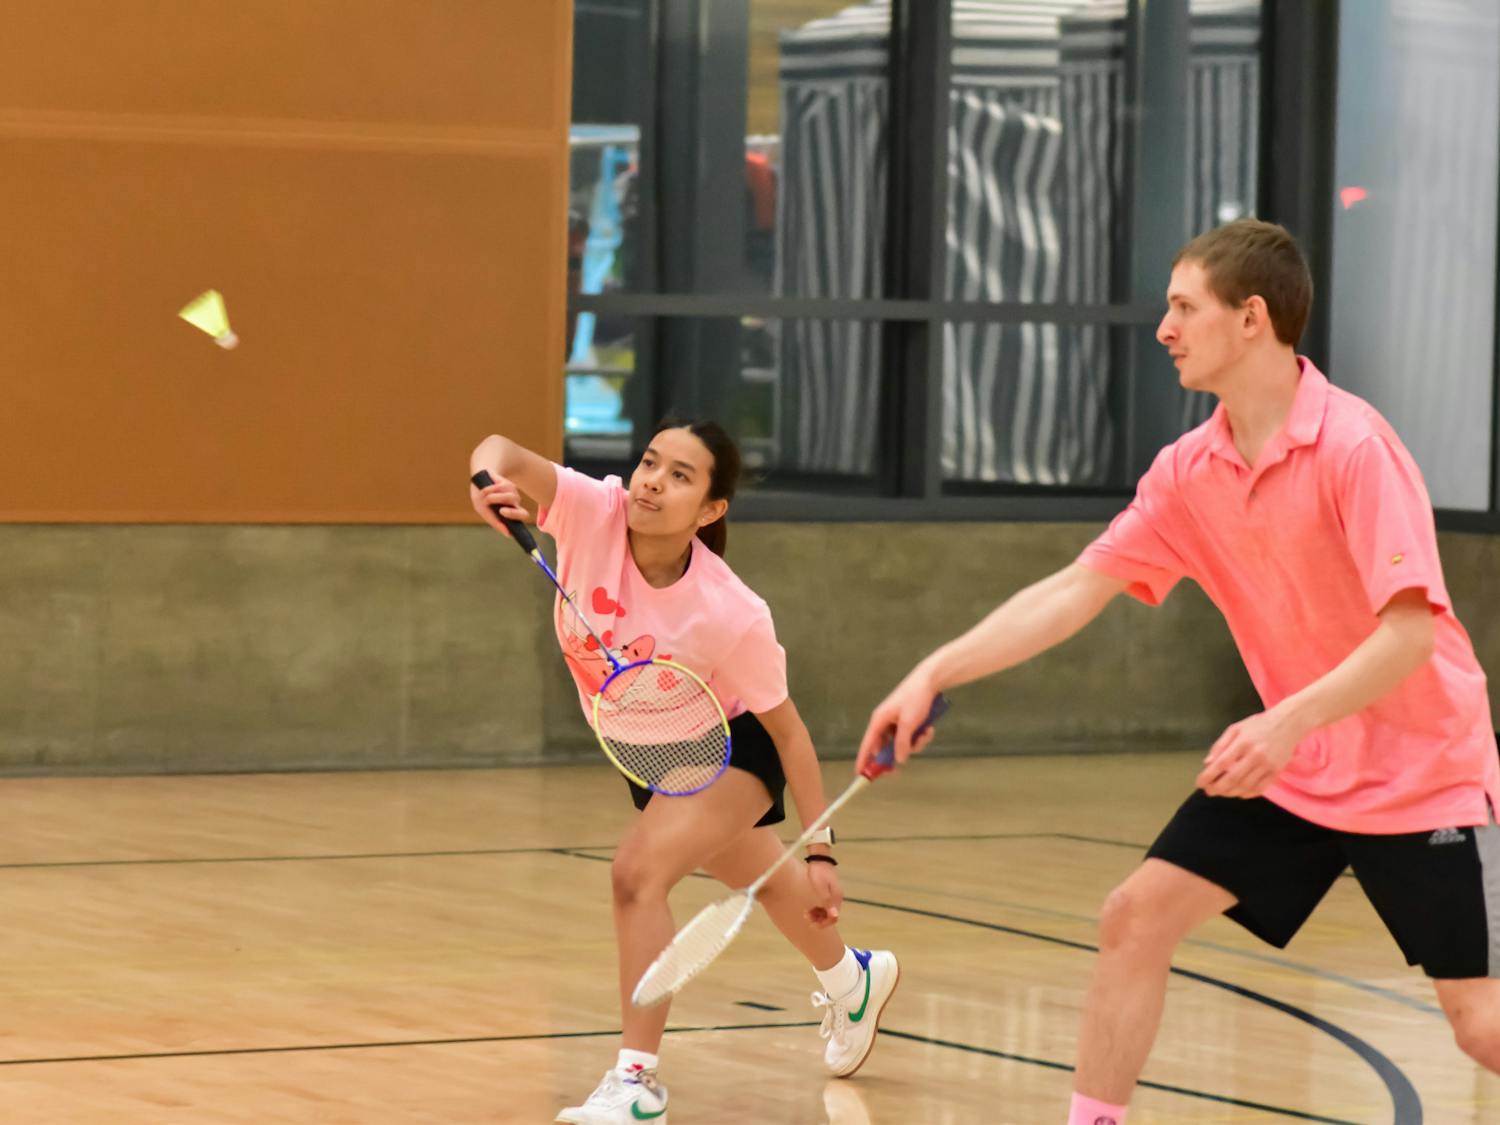 A different approach to Valentine’s Day: The love of badminton wins